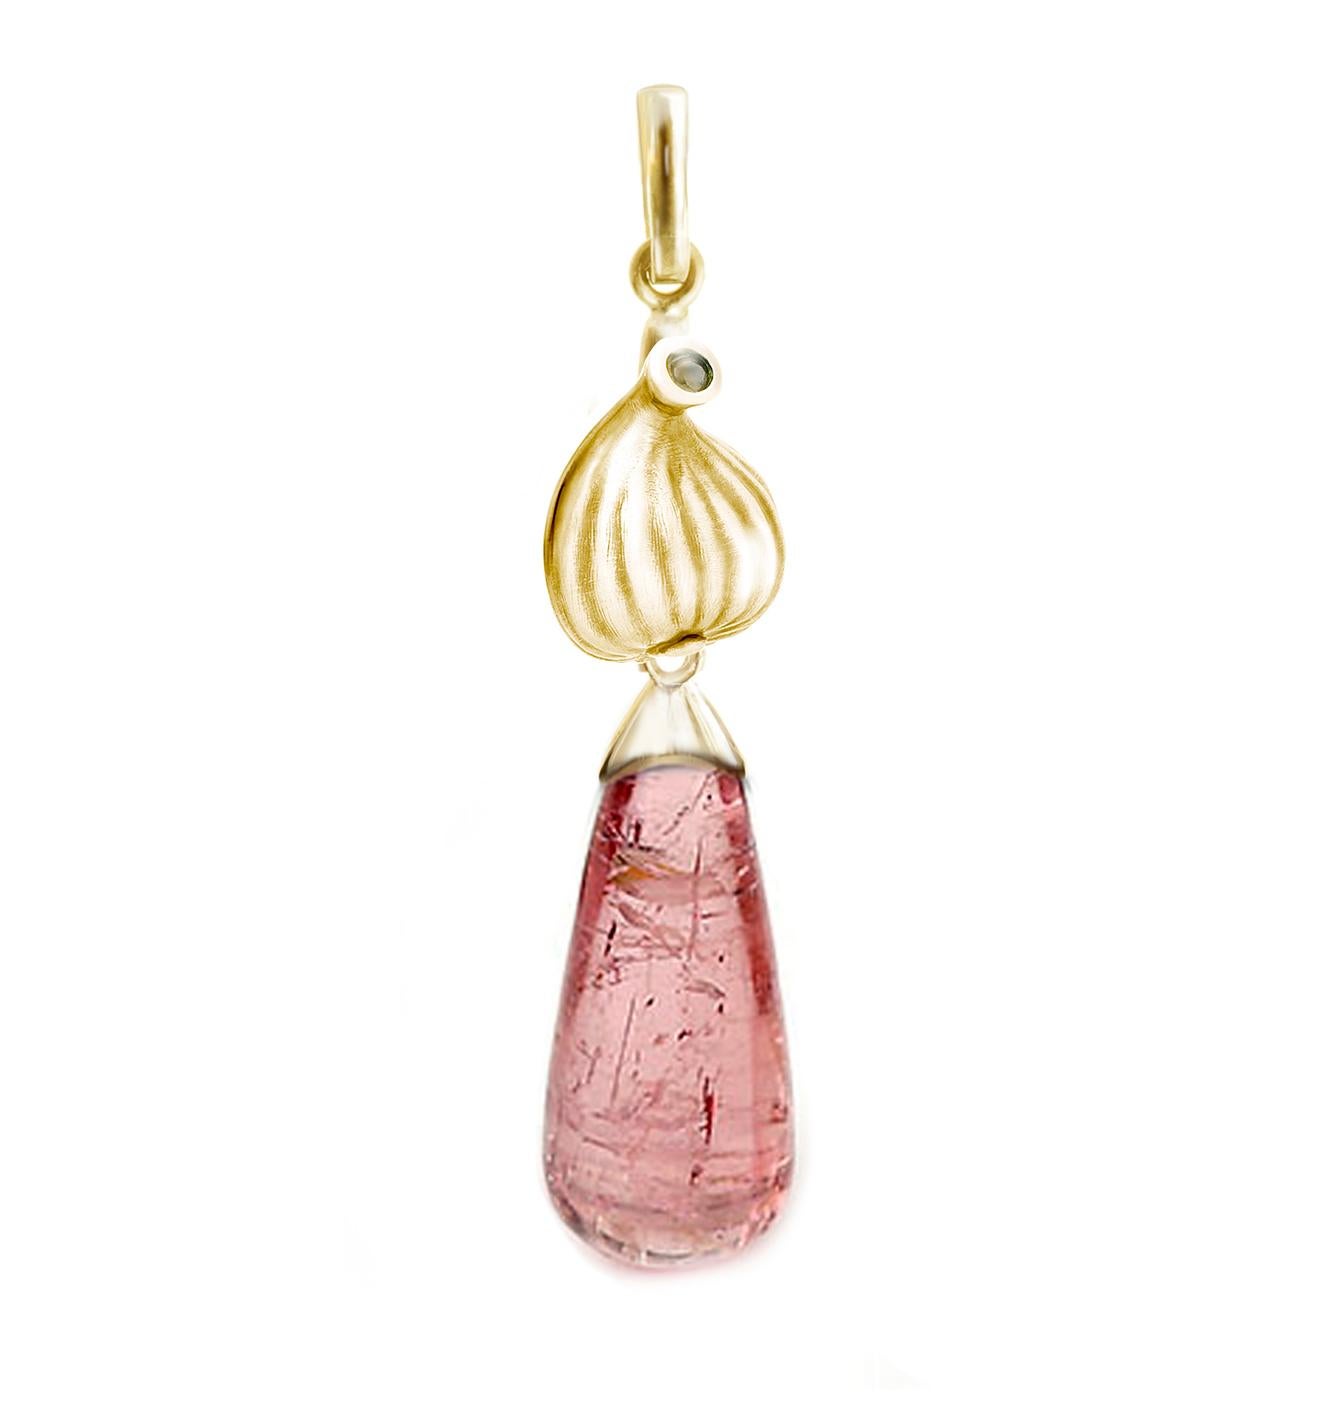 This contemporary drop brooch by the artist is made of 18 karat yellow gold with a 20x8 mm (8.23 carats) natural rose tourmaline and round diamonds. The Fig collection was featured in a review by Vogue UA and was designed by the artist and oil